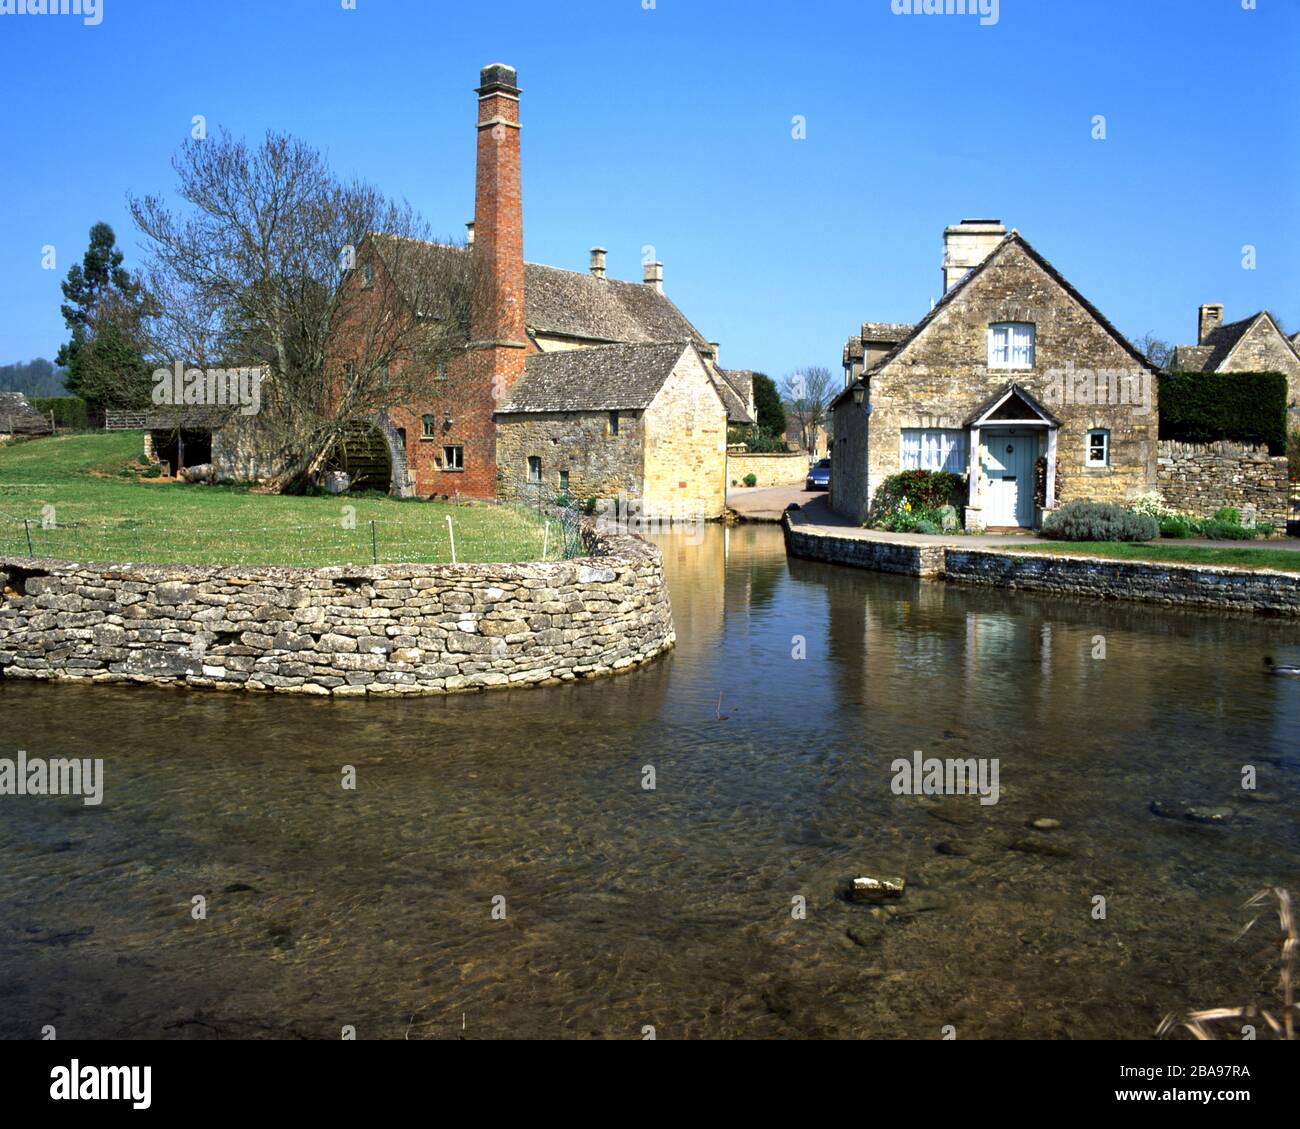 The Old Mill and River Eye, Lower Salughter vicino a Bourton on the Water, Cotswolds, Gloucestershire. Foto Stock